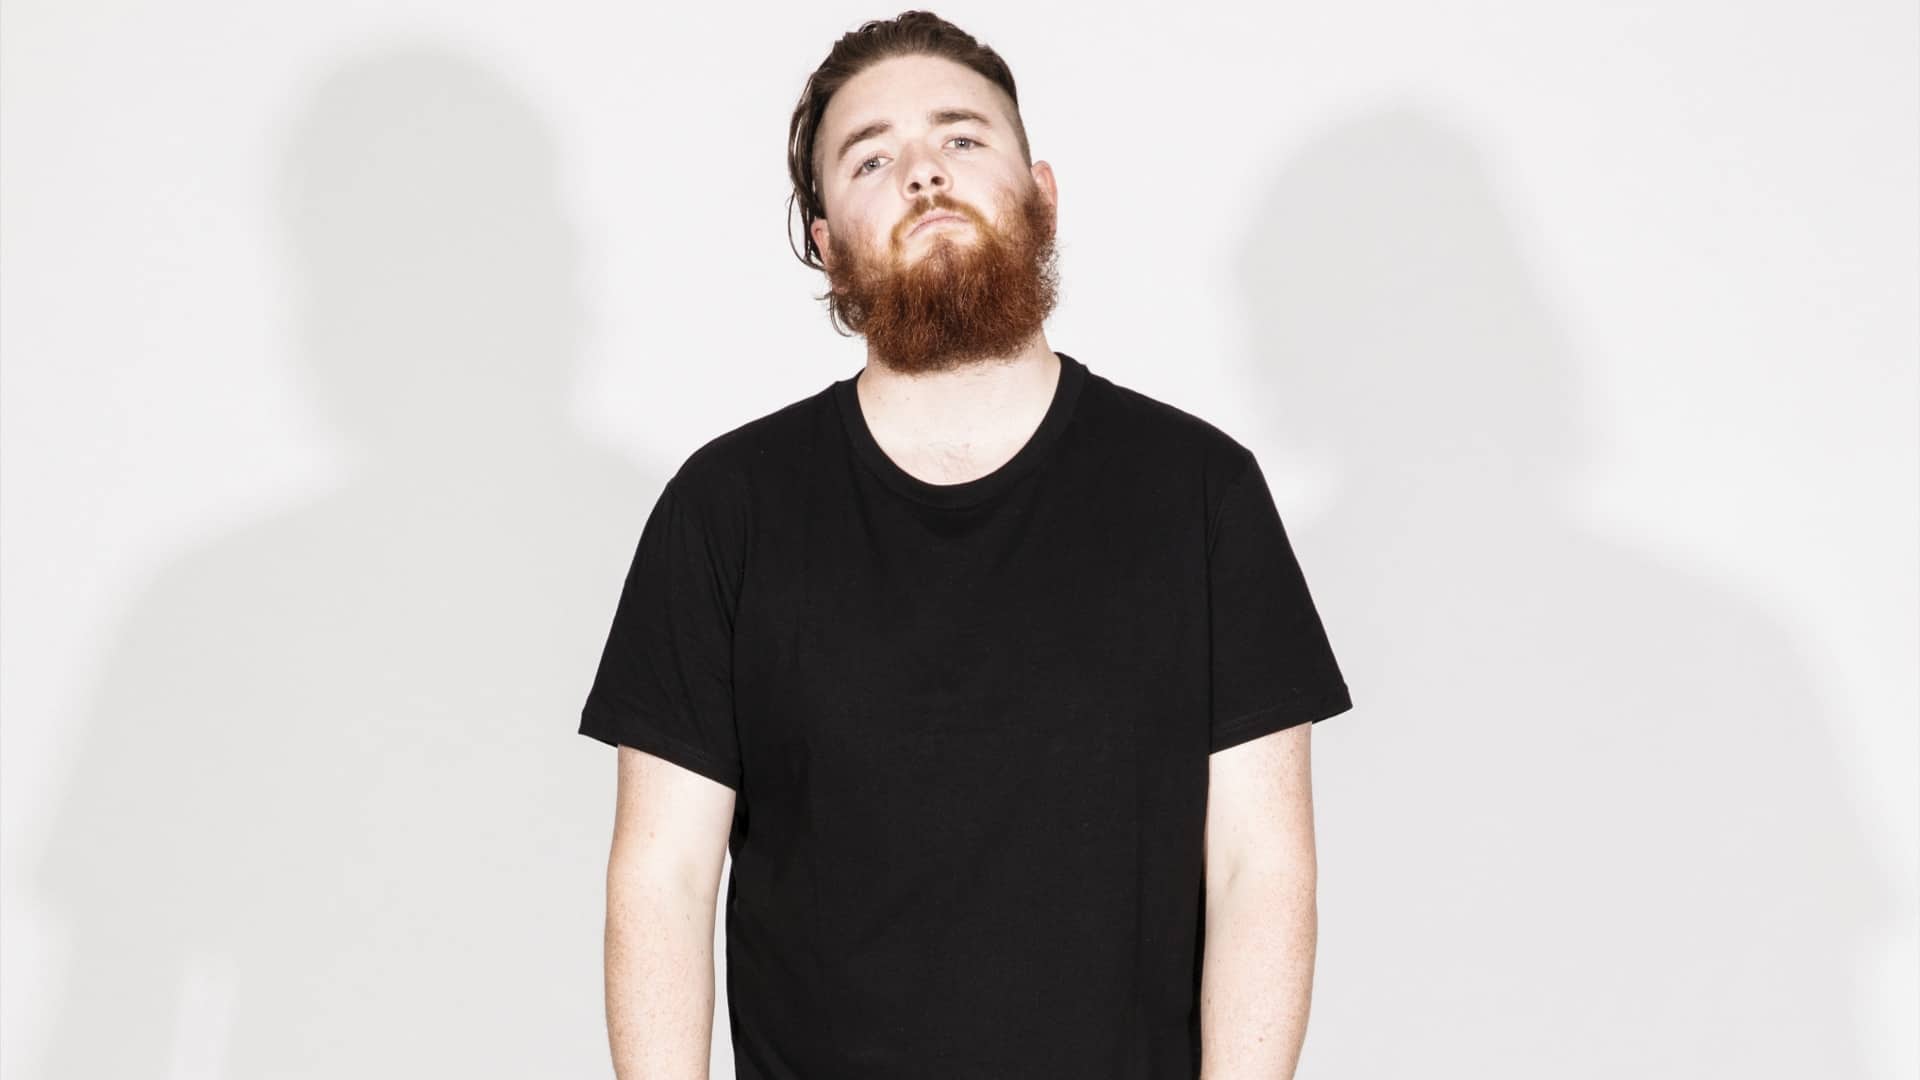 QUIX releases new DnB tune ‘Make Up Your Mind’: Listen